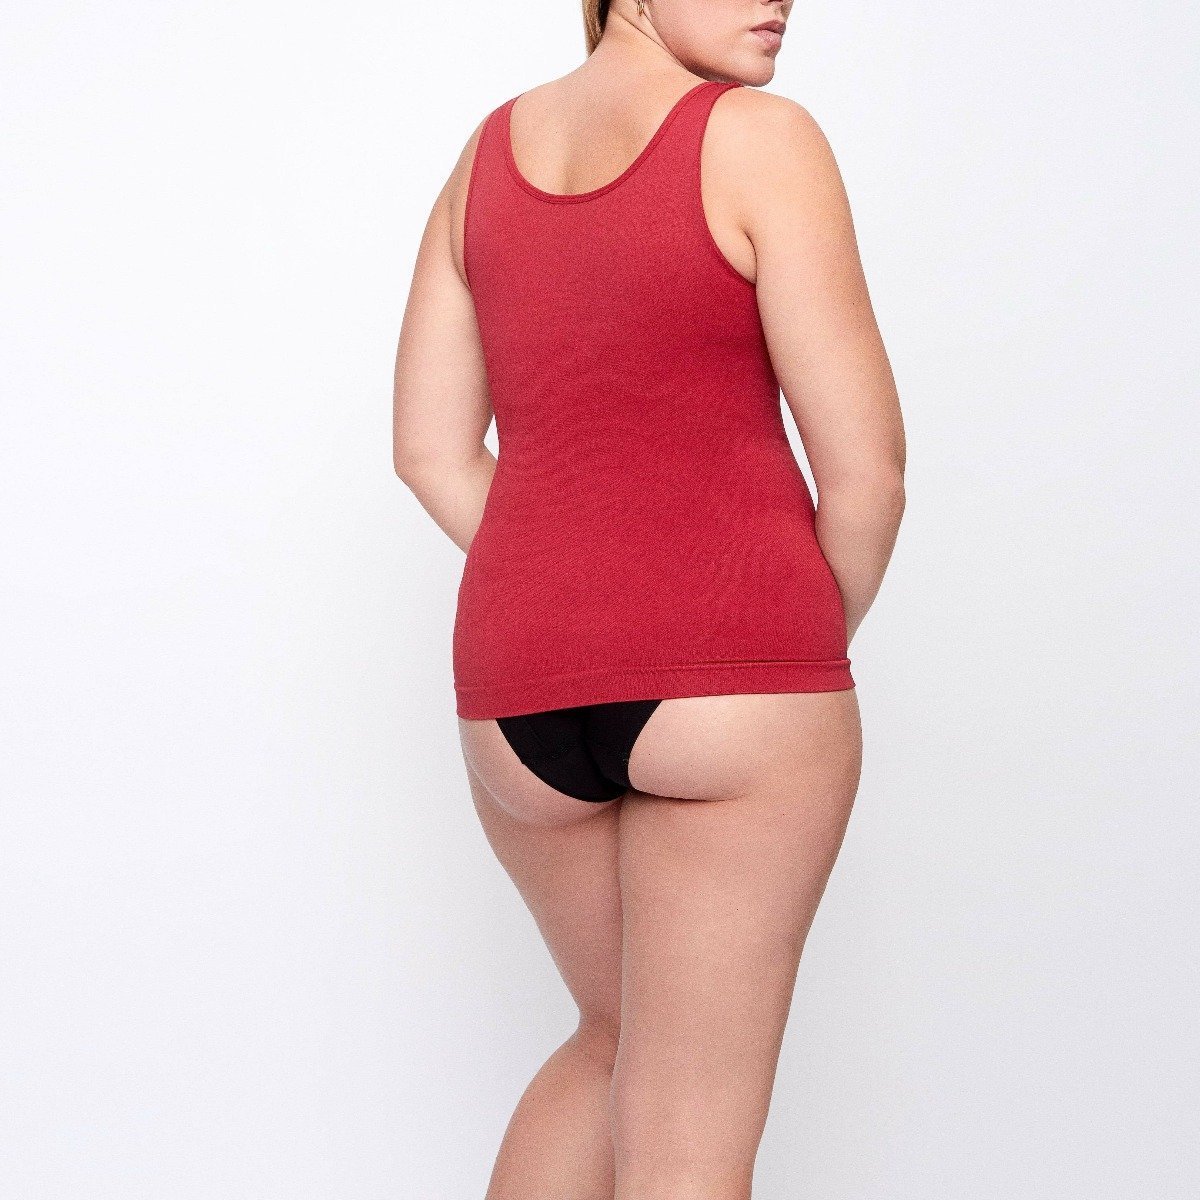 Shaping Tank Cami - Red - Underoutfit - UN-TC-691-S-RED